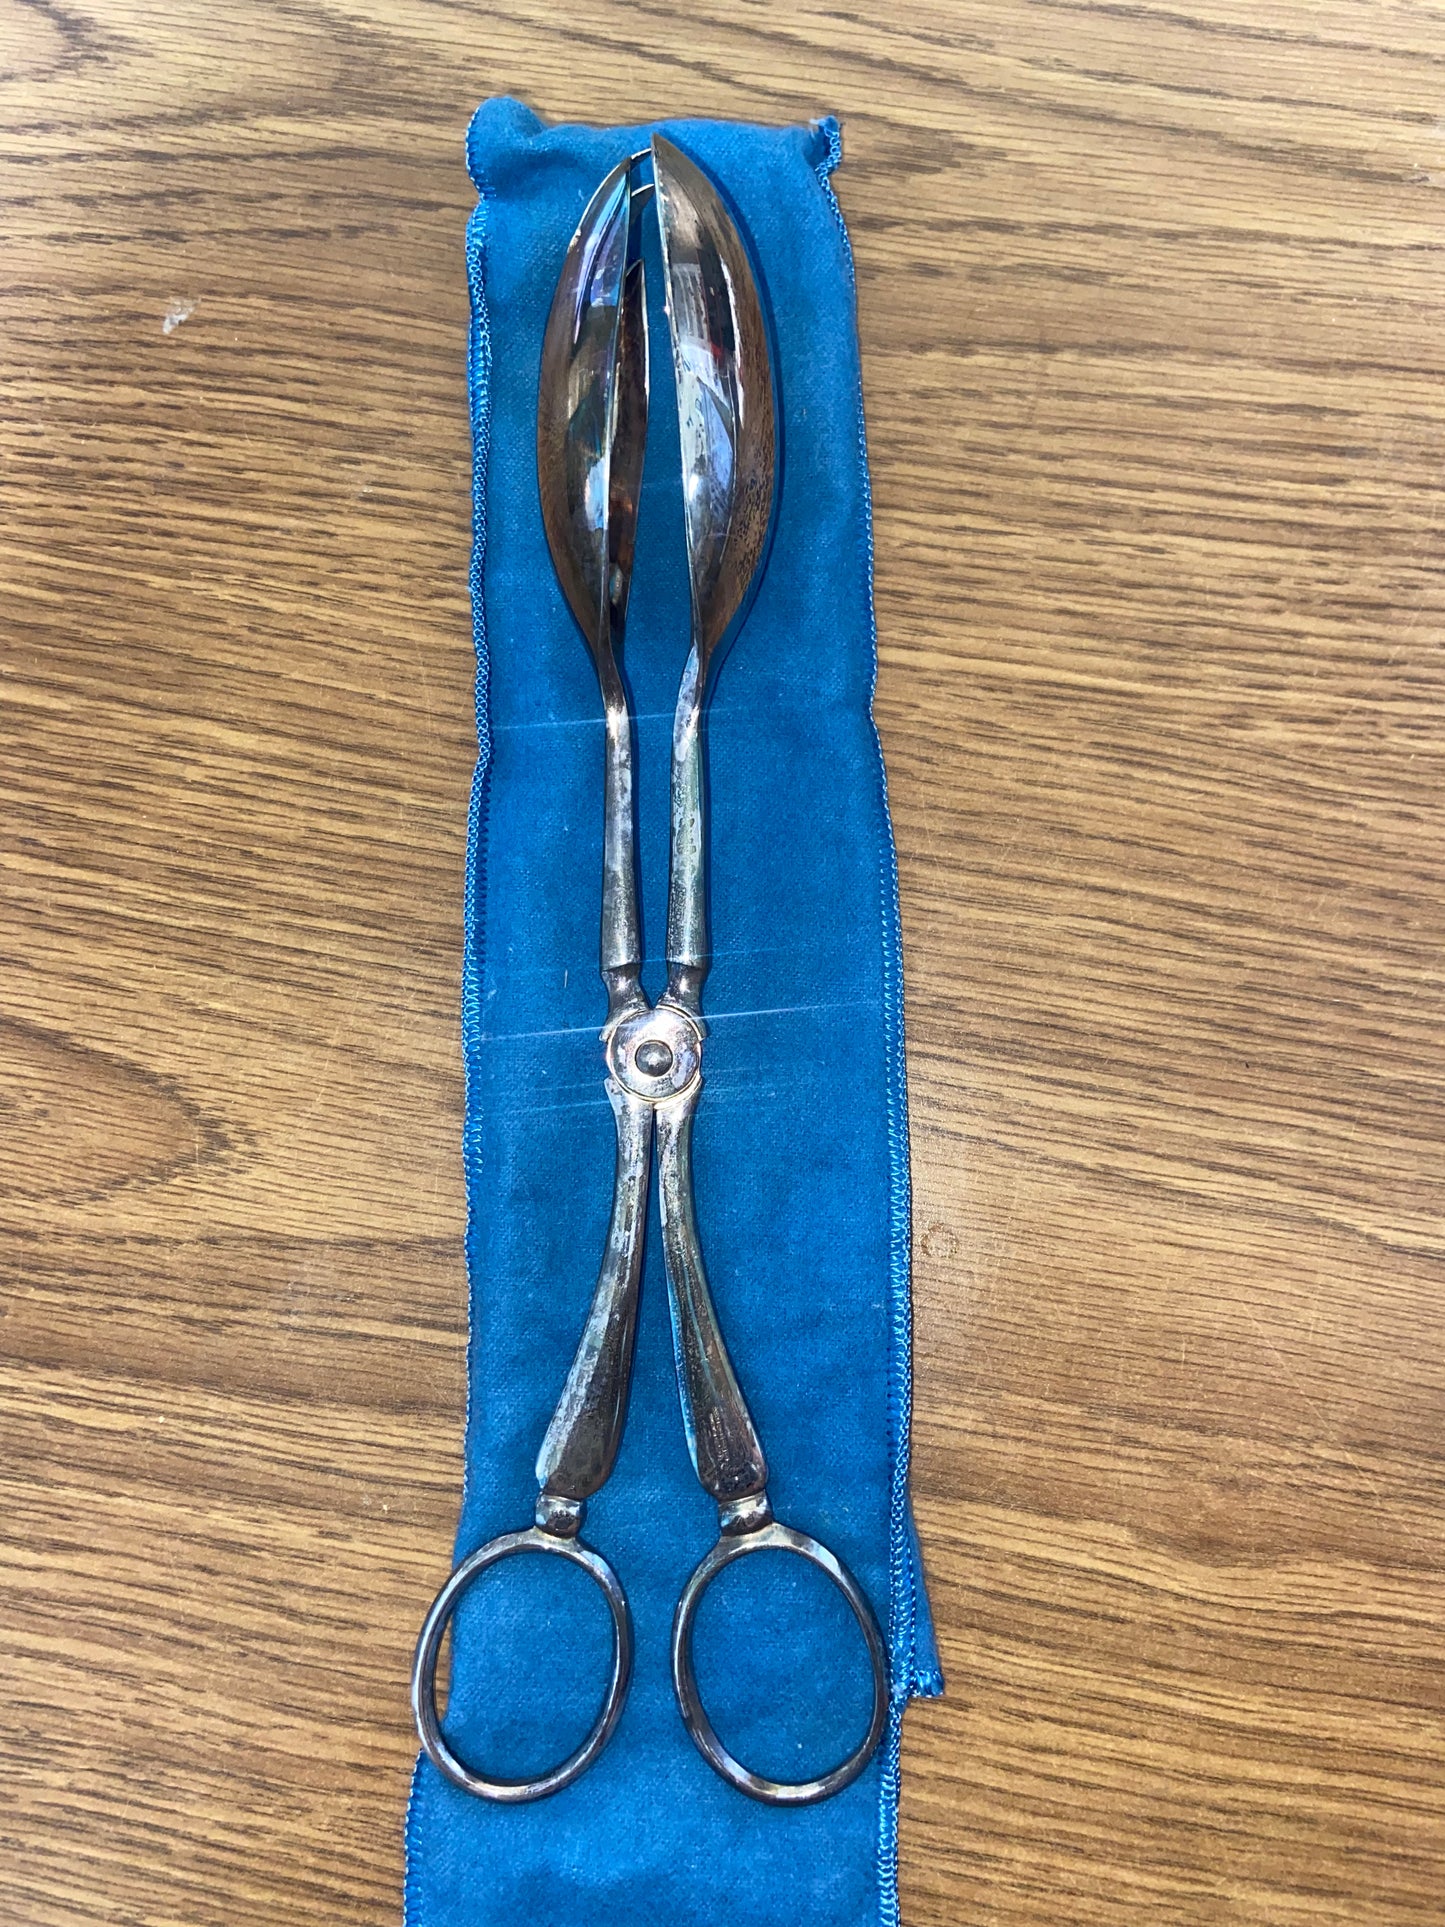 Cooper Bros & Sons Silverplated Salad Serving Tongs